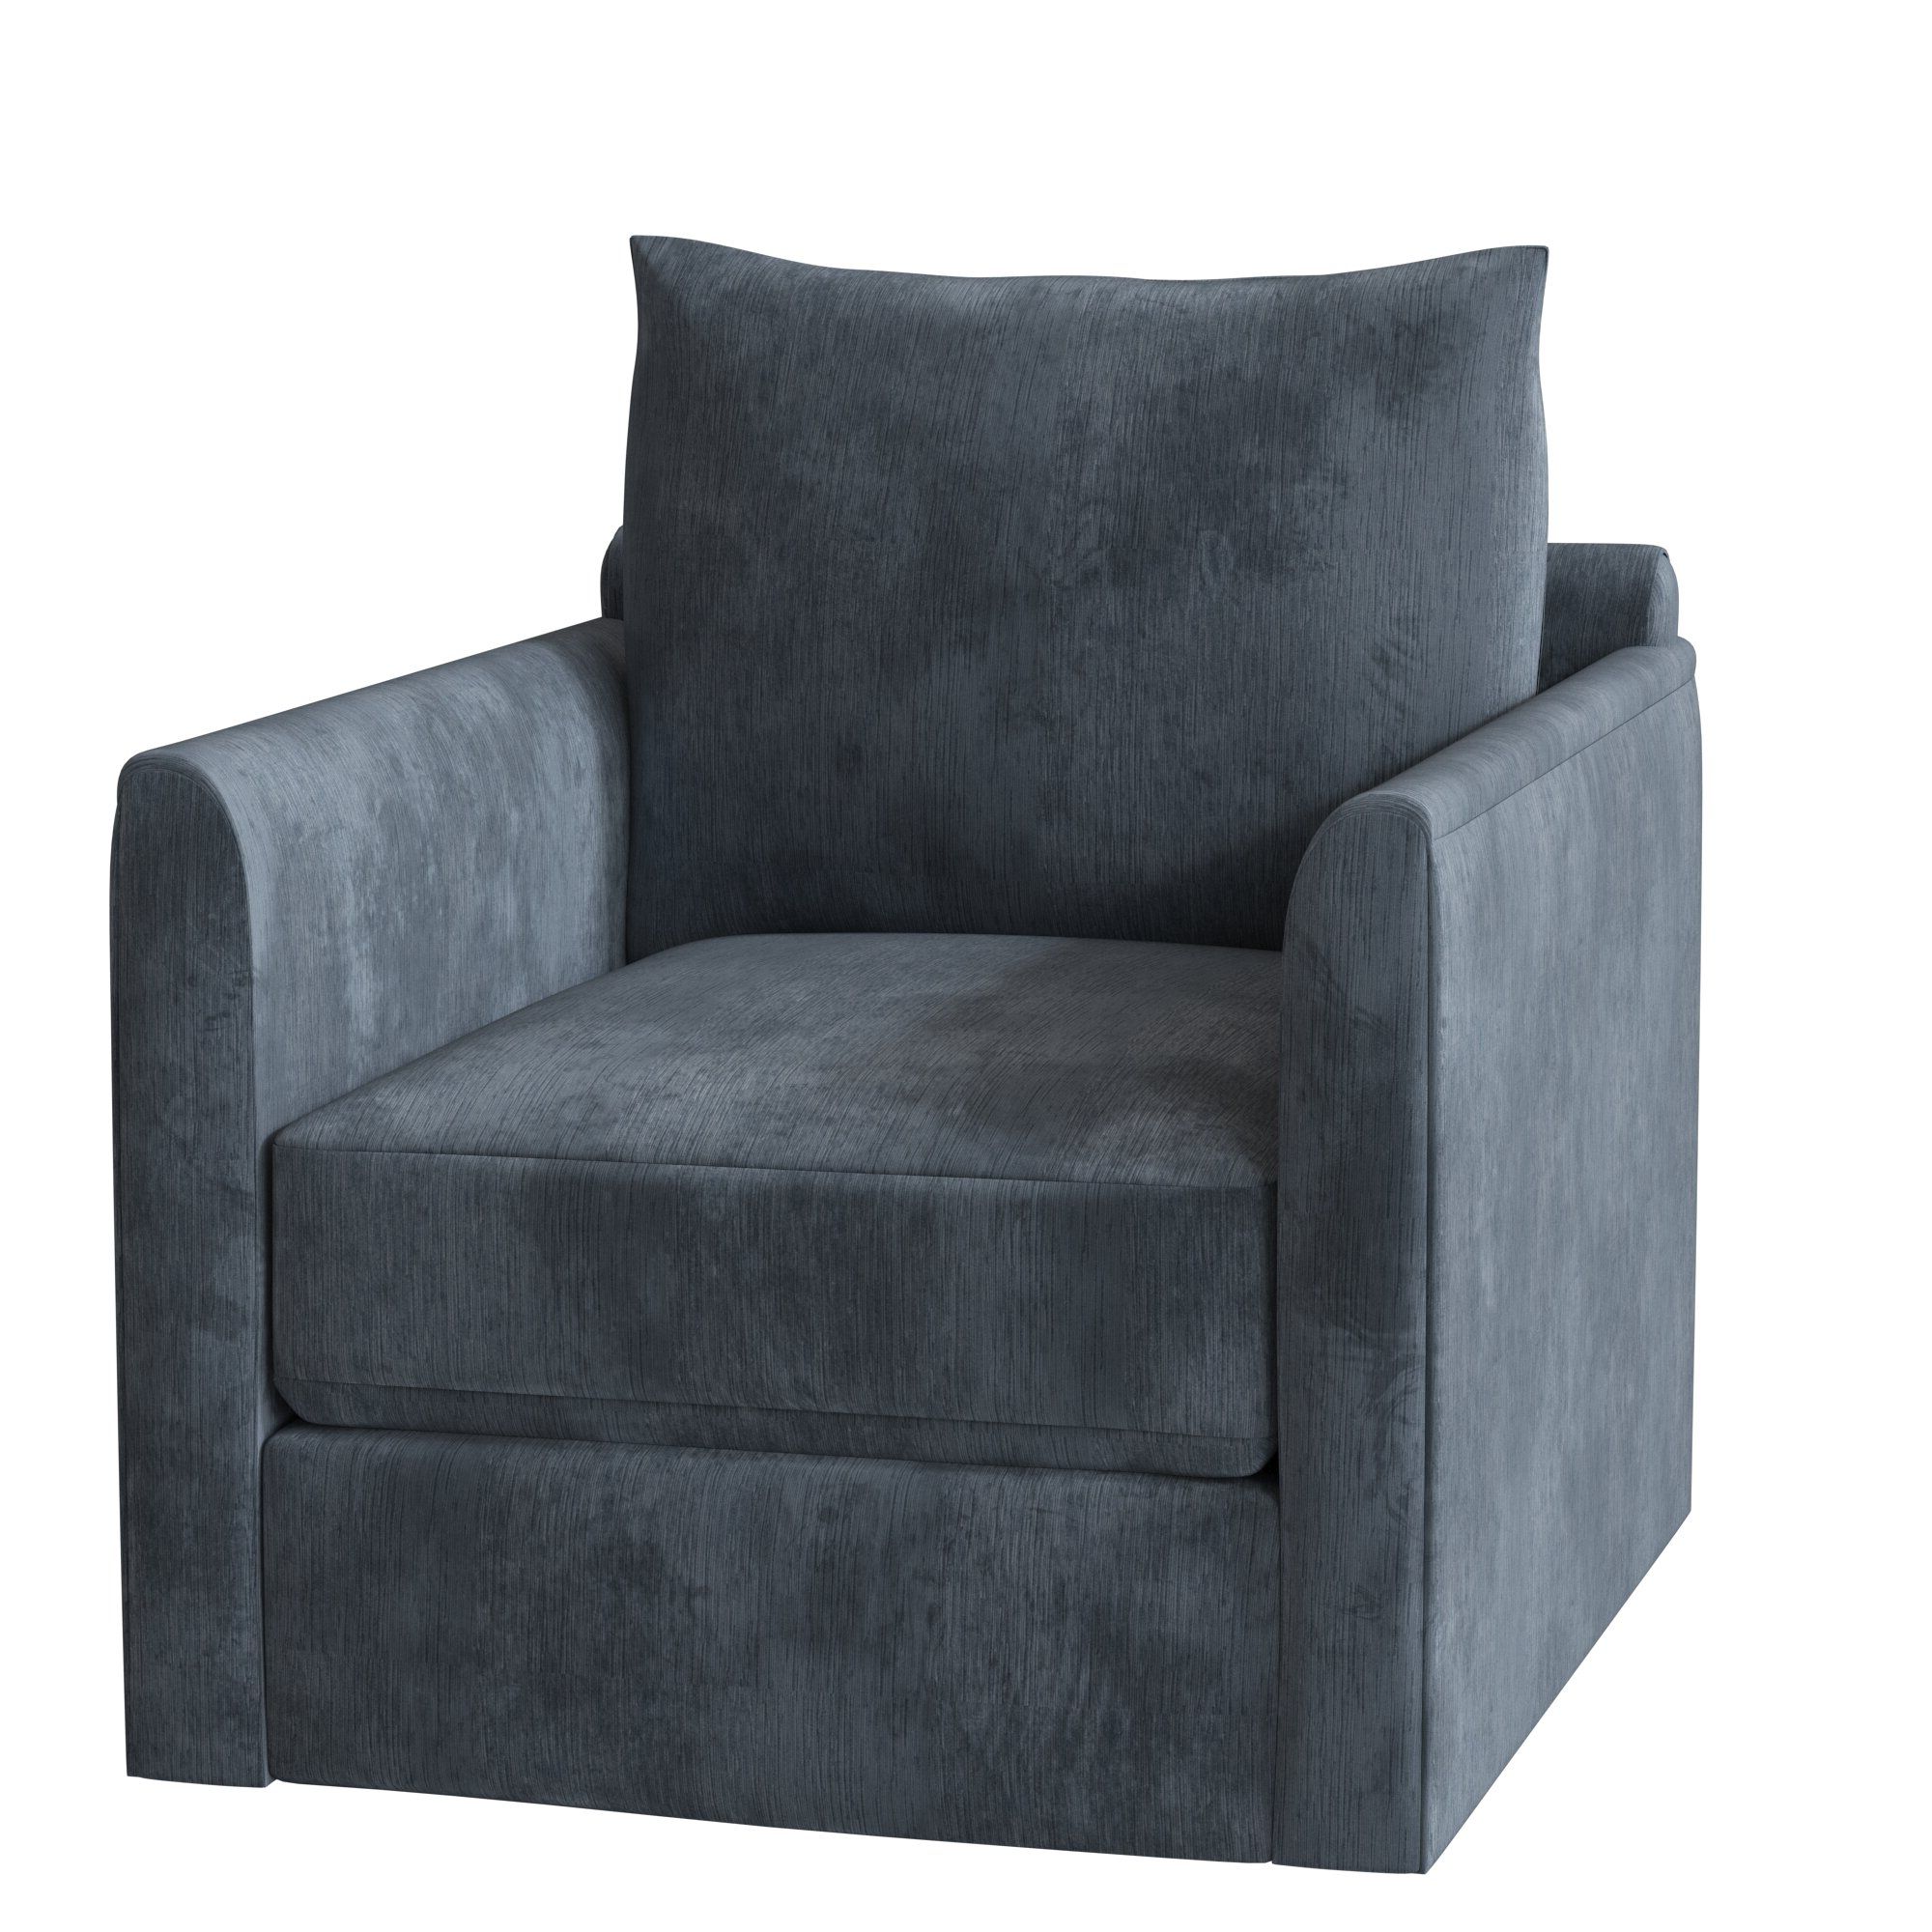 Alice Swivel Armchair Throughout Recent Vineland Polyester Swivel Armchairs (View 16 of 20)